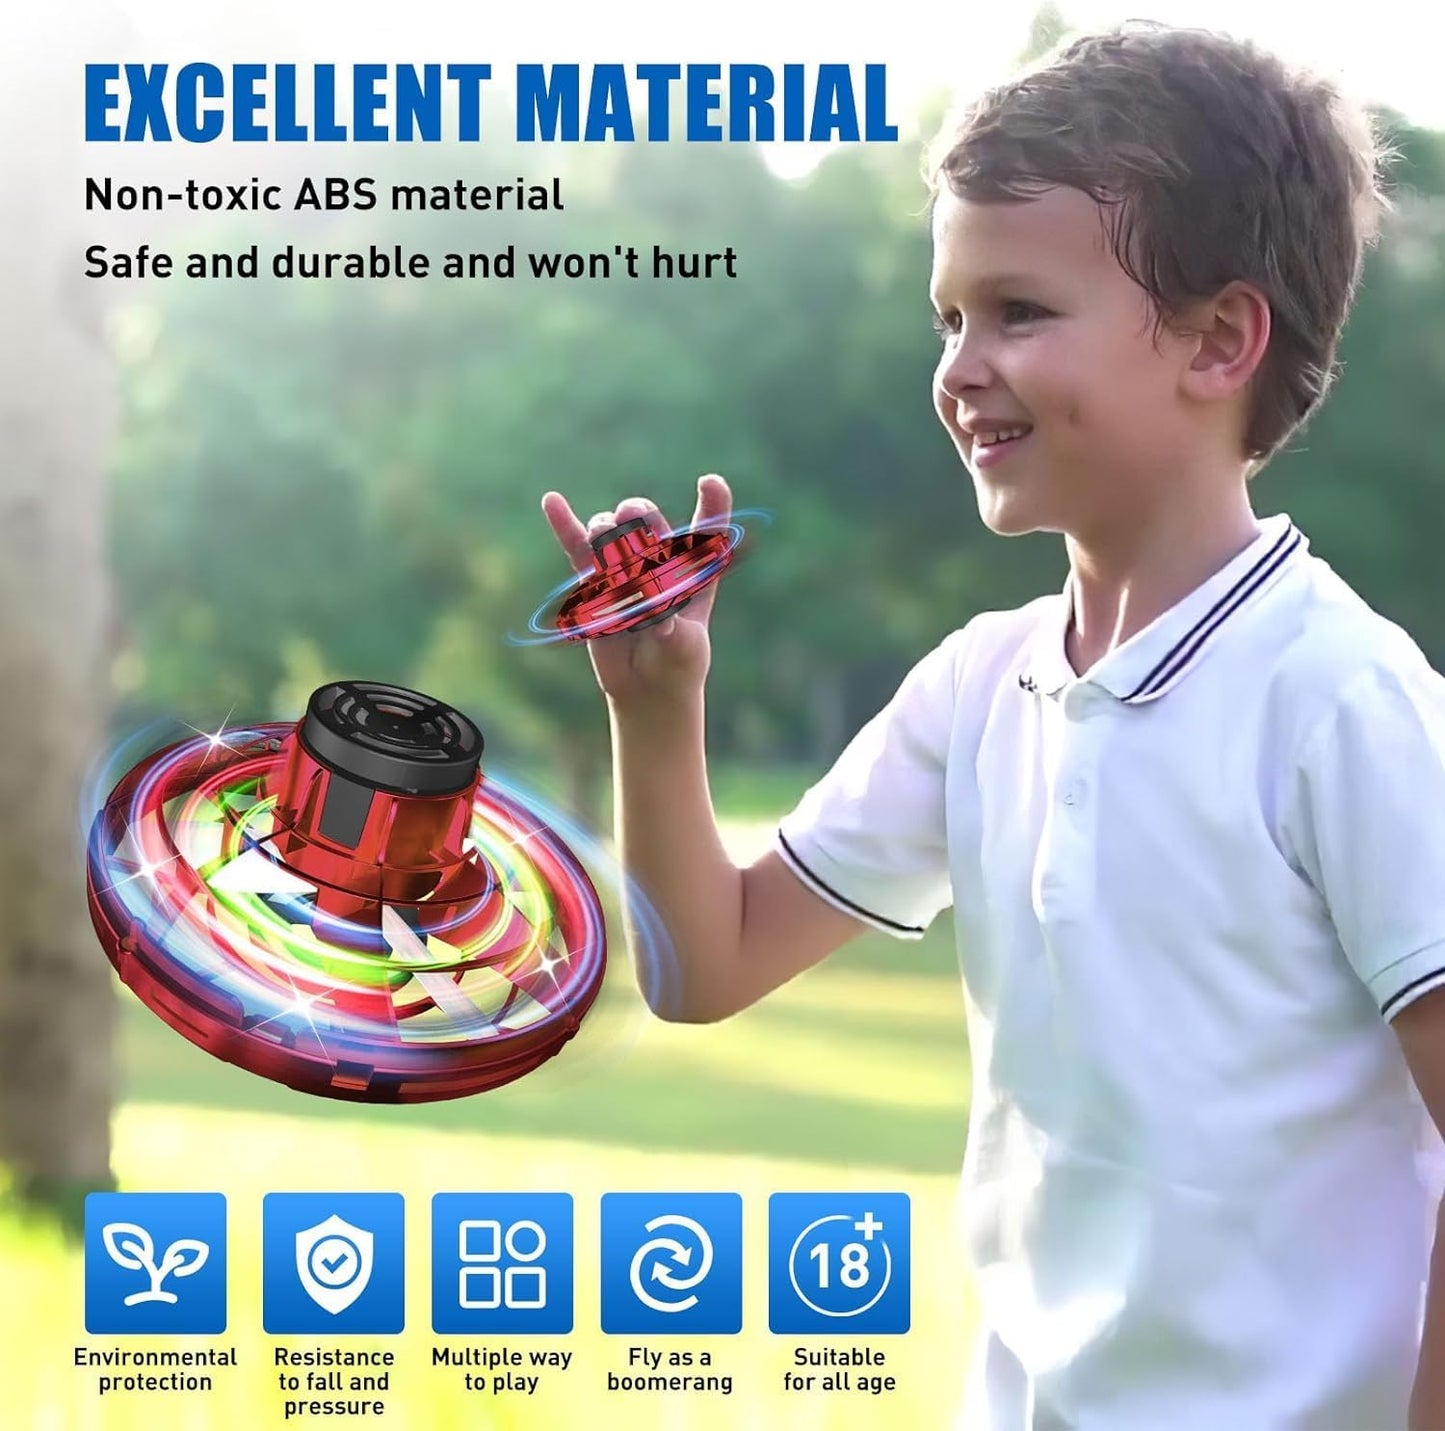 🛸⚡Magical Flying Spinner | FLAT 40% OFF 🔥📦